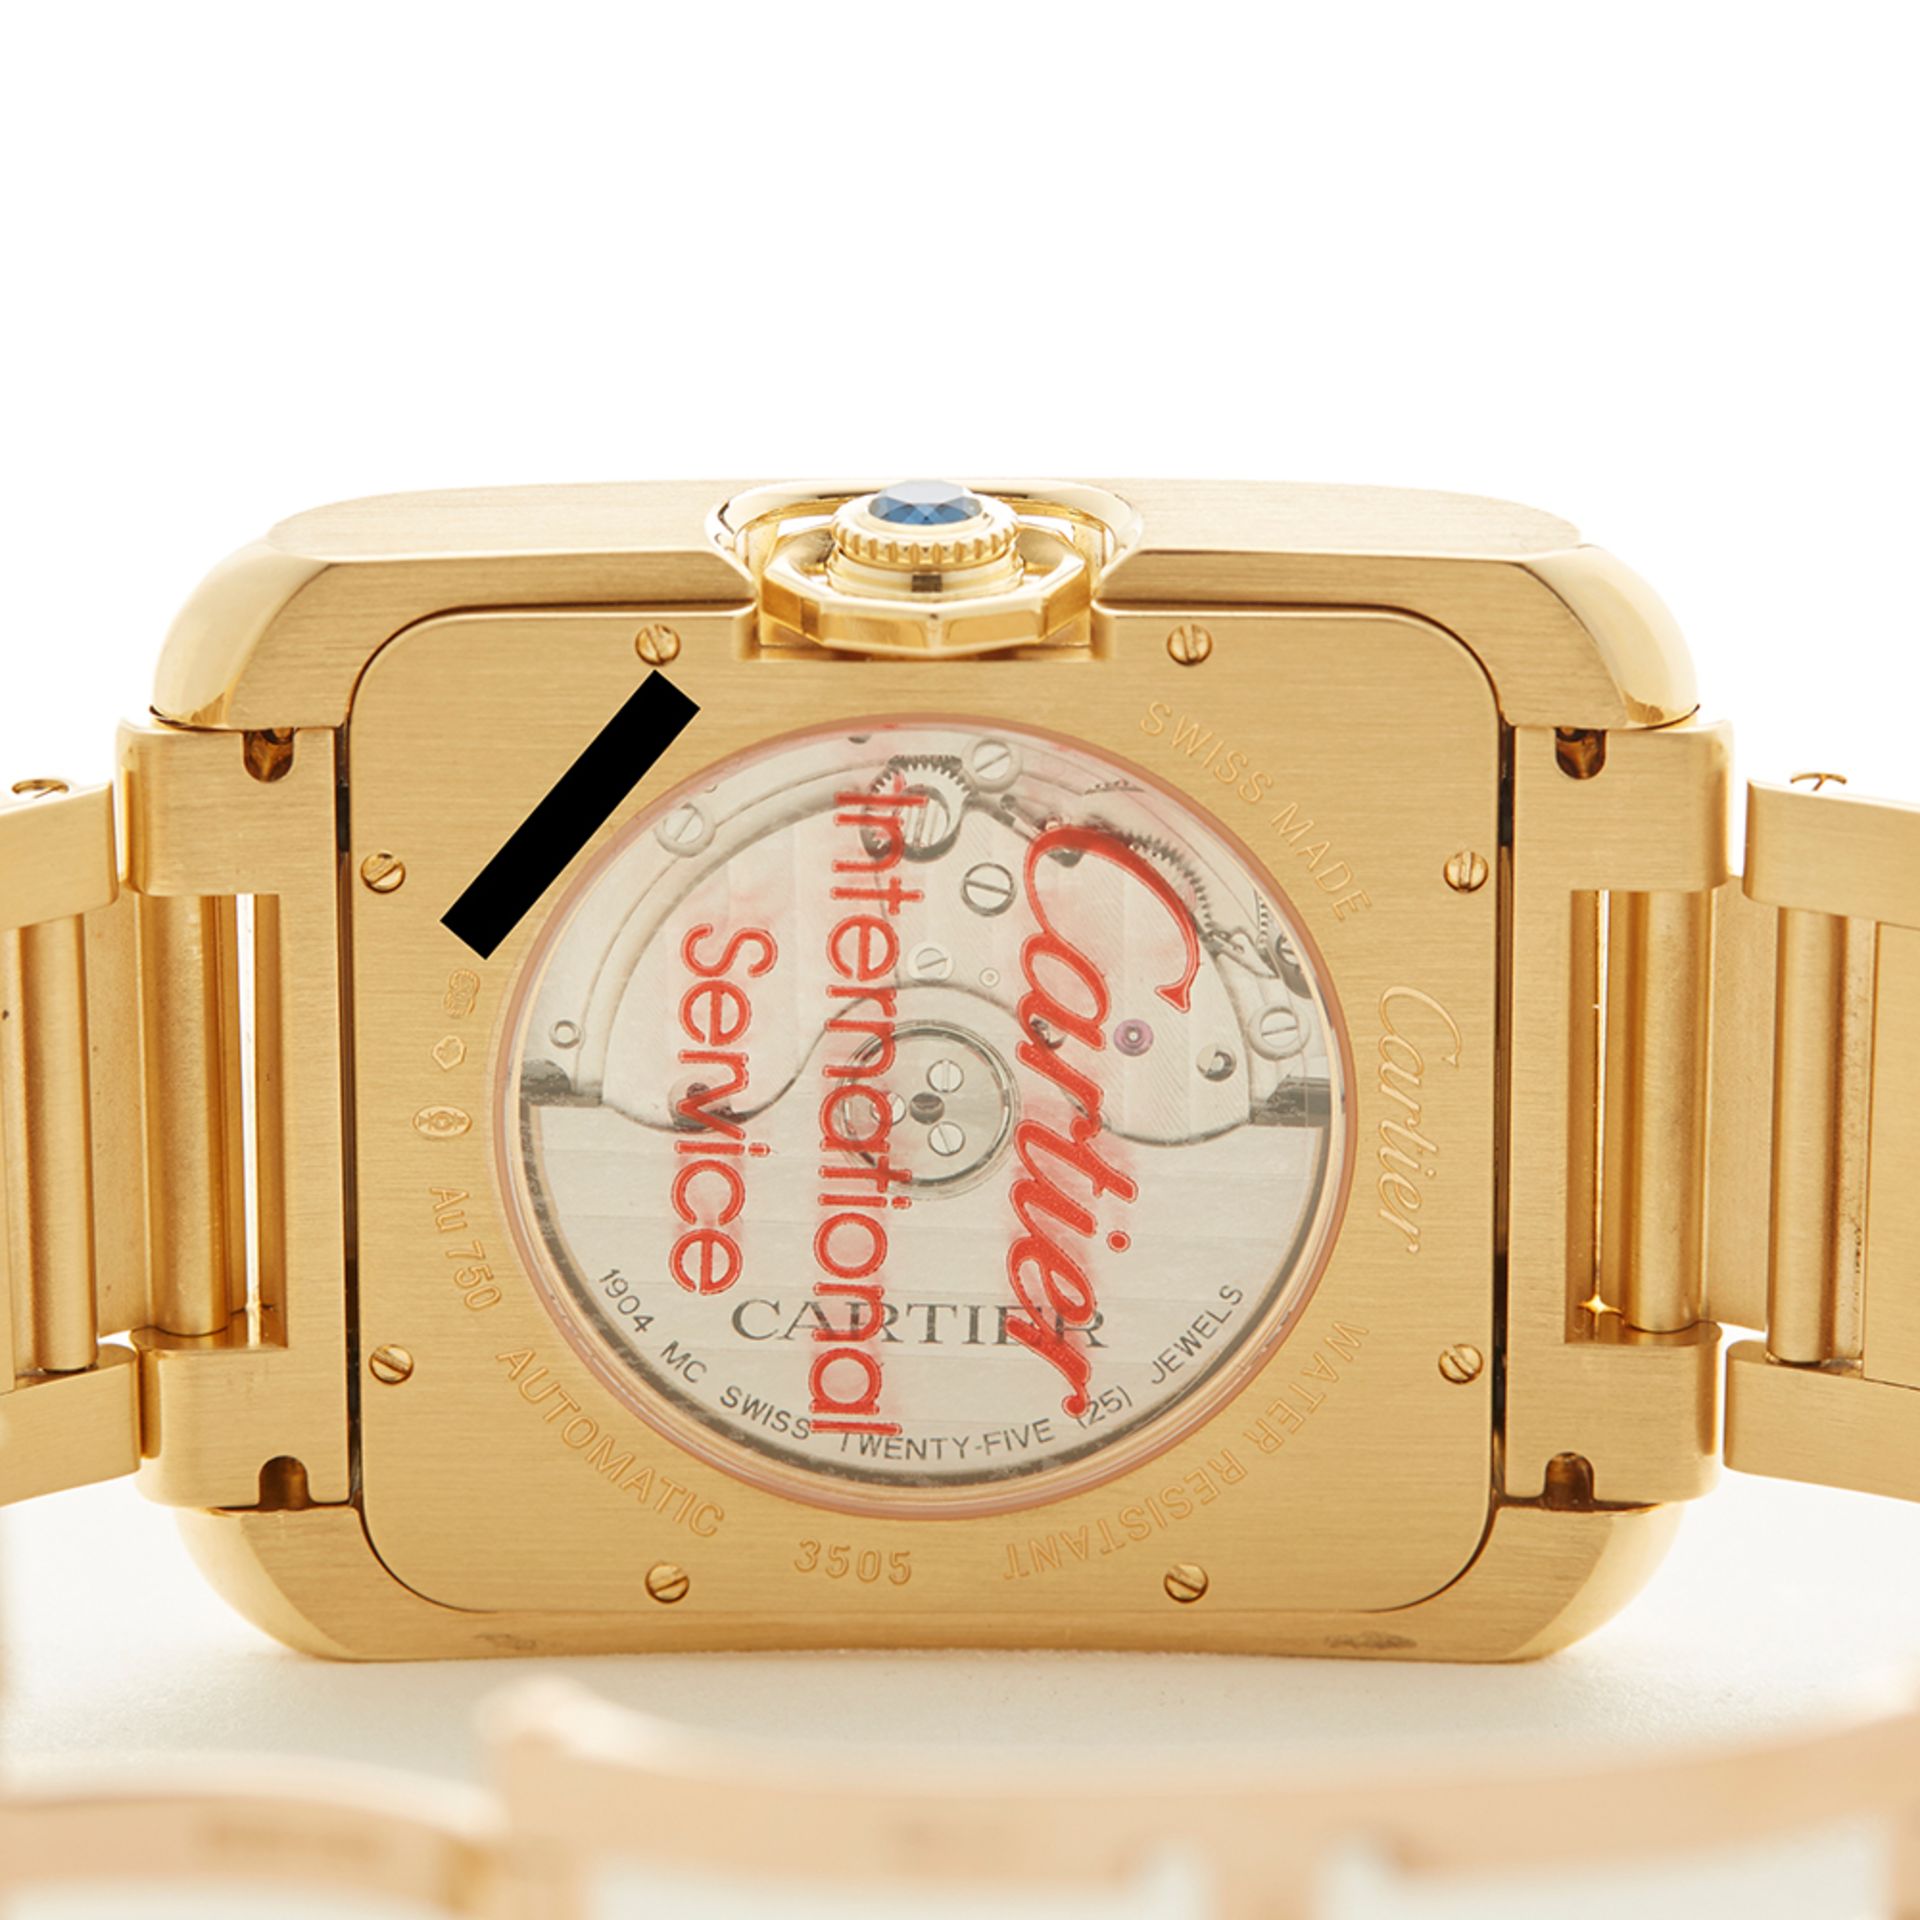 Cartier Tank Anglaise 37mm 18k Yellow Gold - 3505 or W5310018 - Image 8 of 8